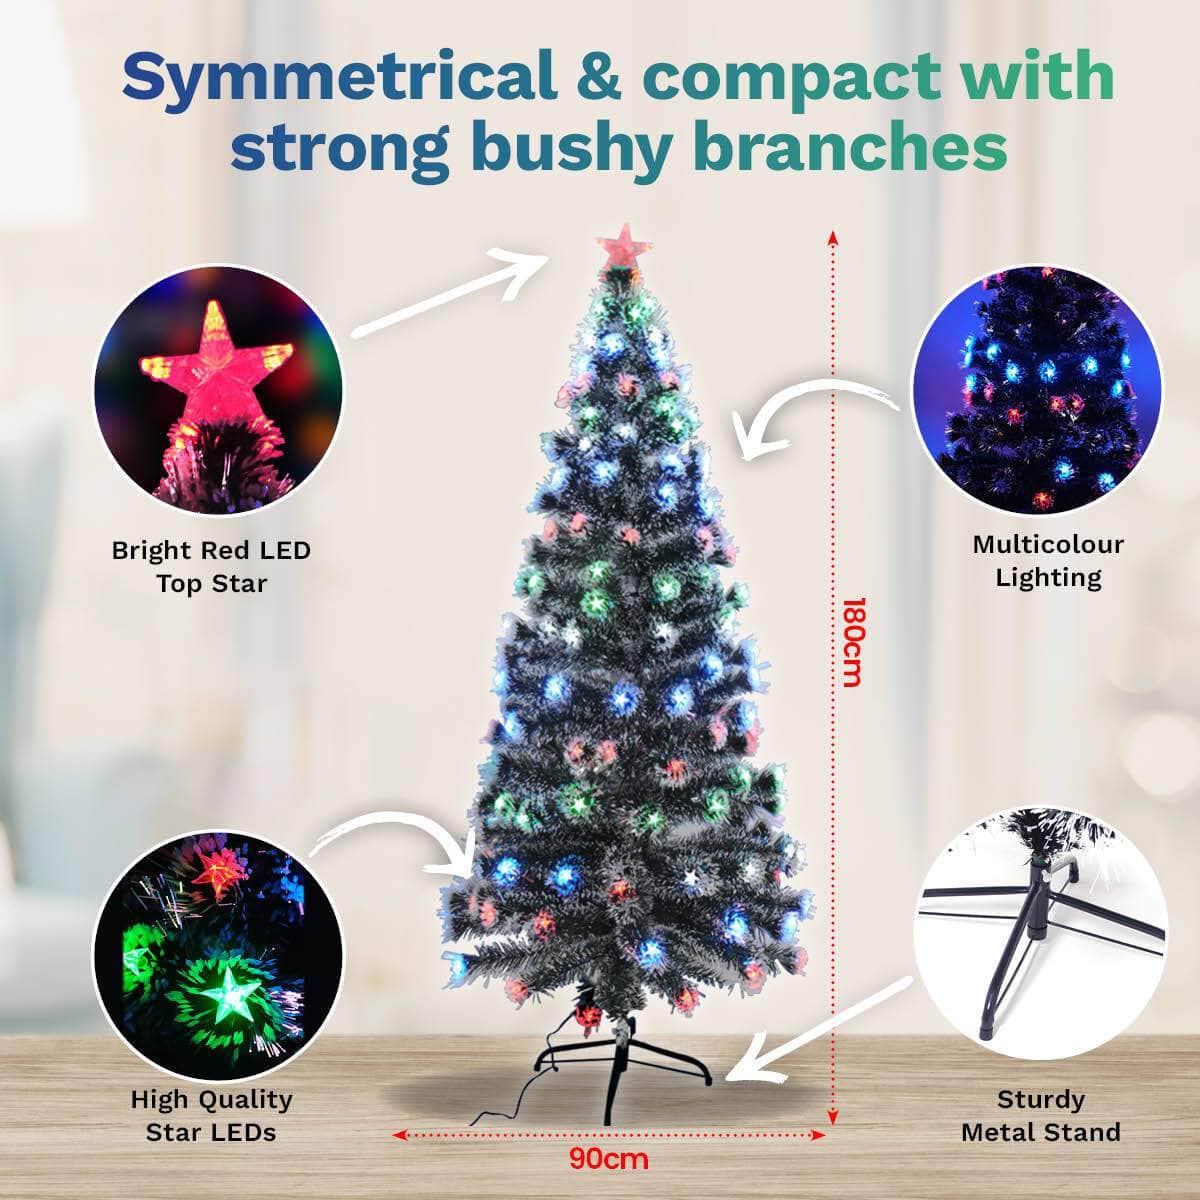 1.8m Pine Tree 210 Multi-Colour LED Lights With 8 Functions